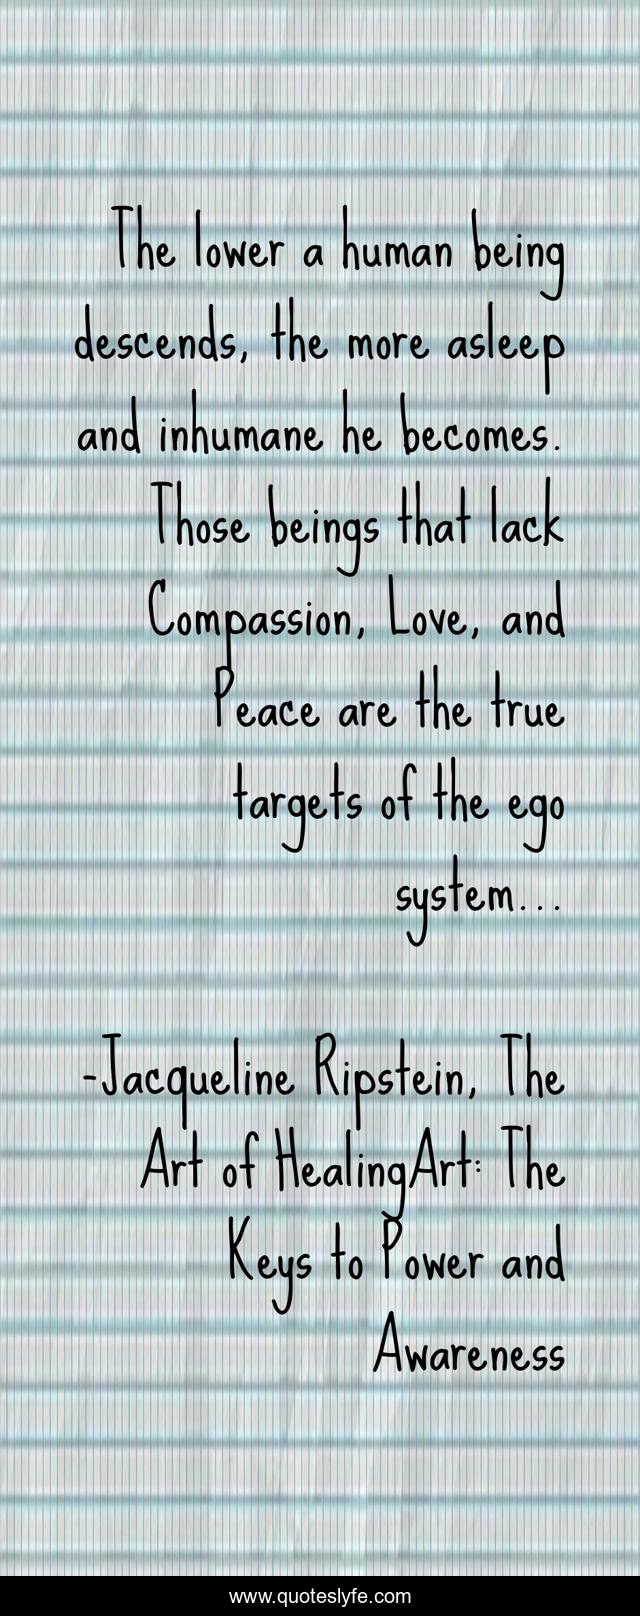 The lower a human being descends, the more asleep and inhumane he becomes. Those beings that lack Compassion, Love, and Peace are the true targets of the ego system...